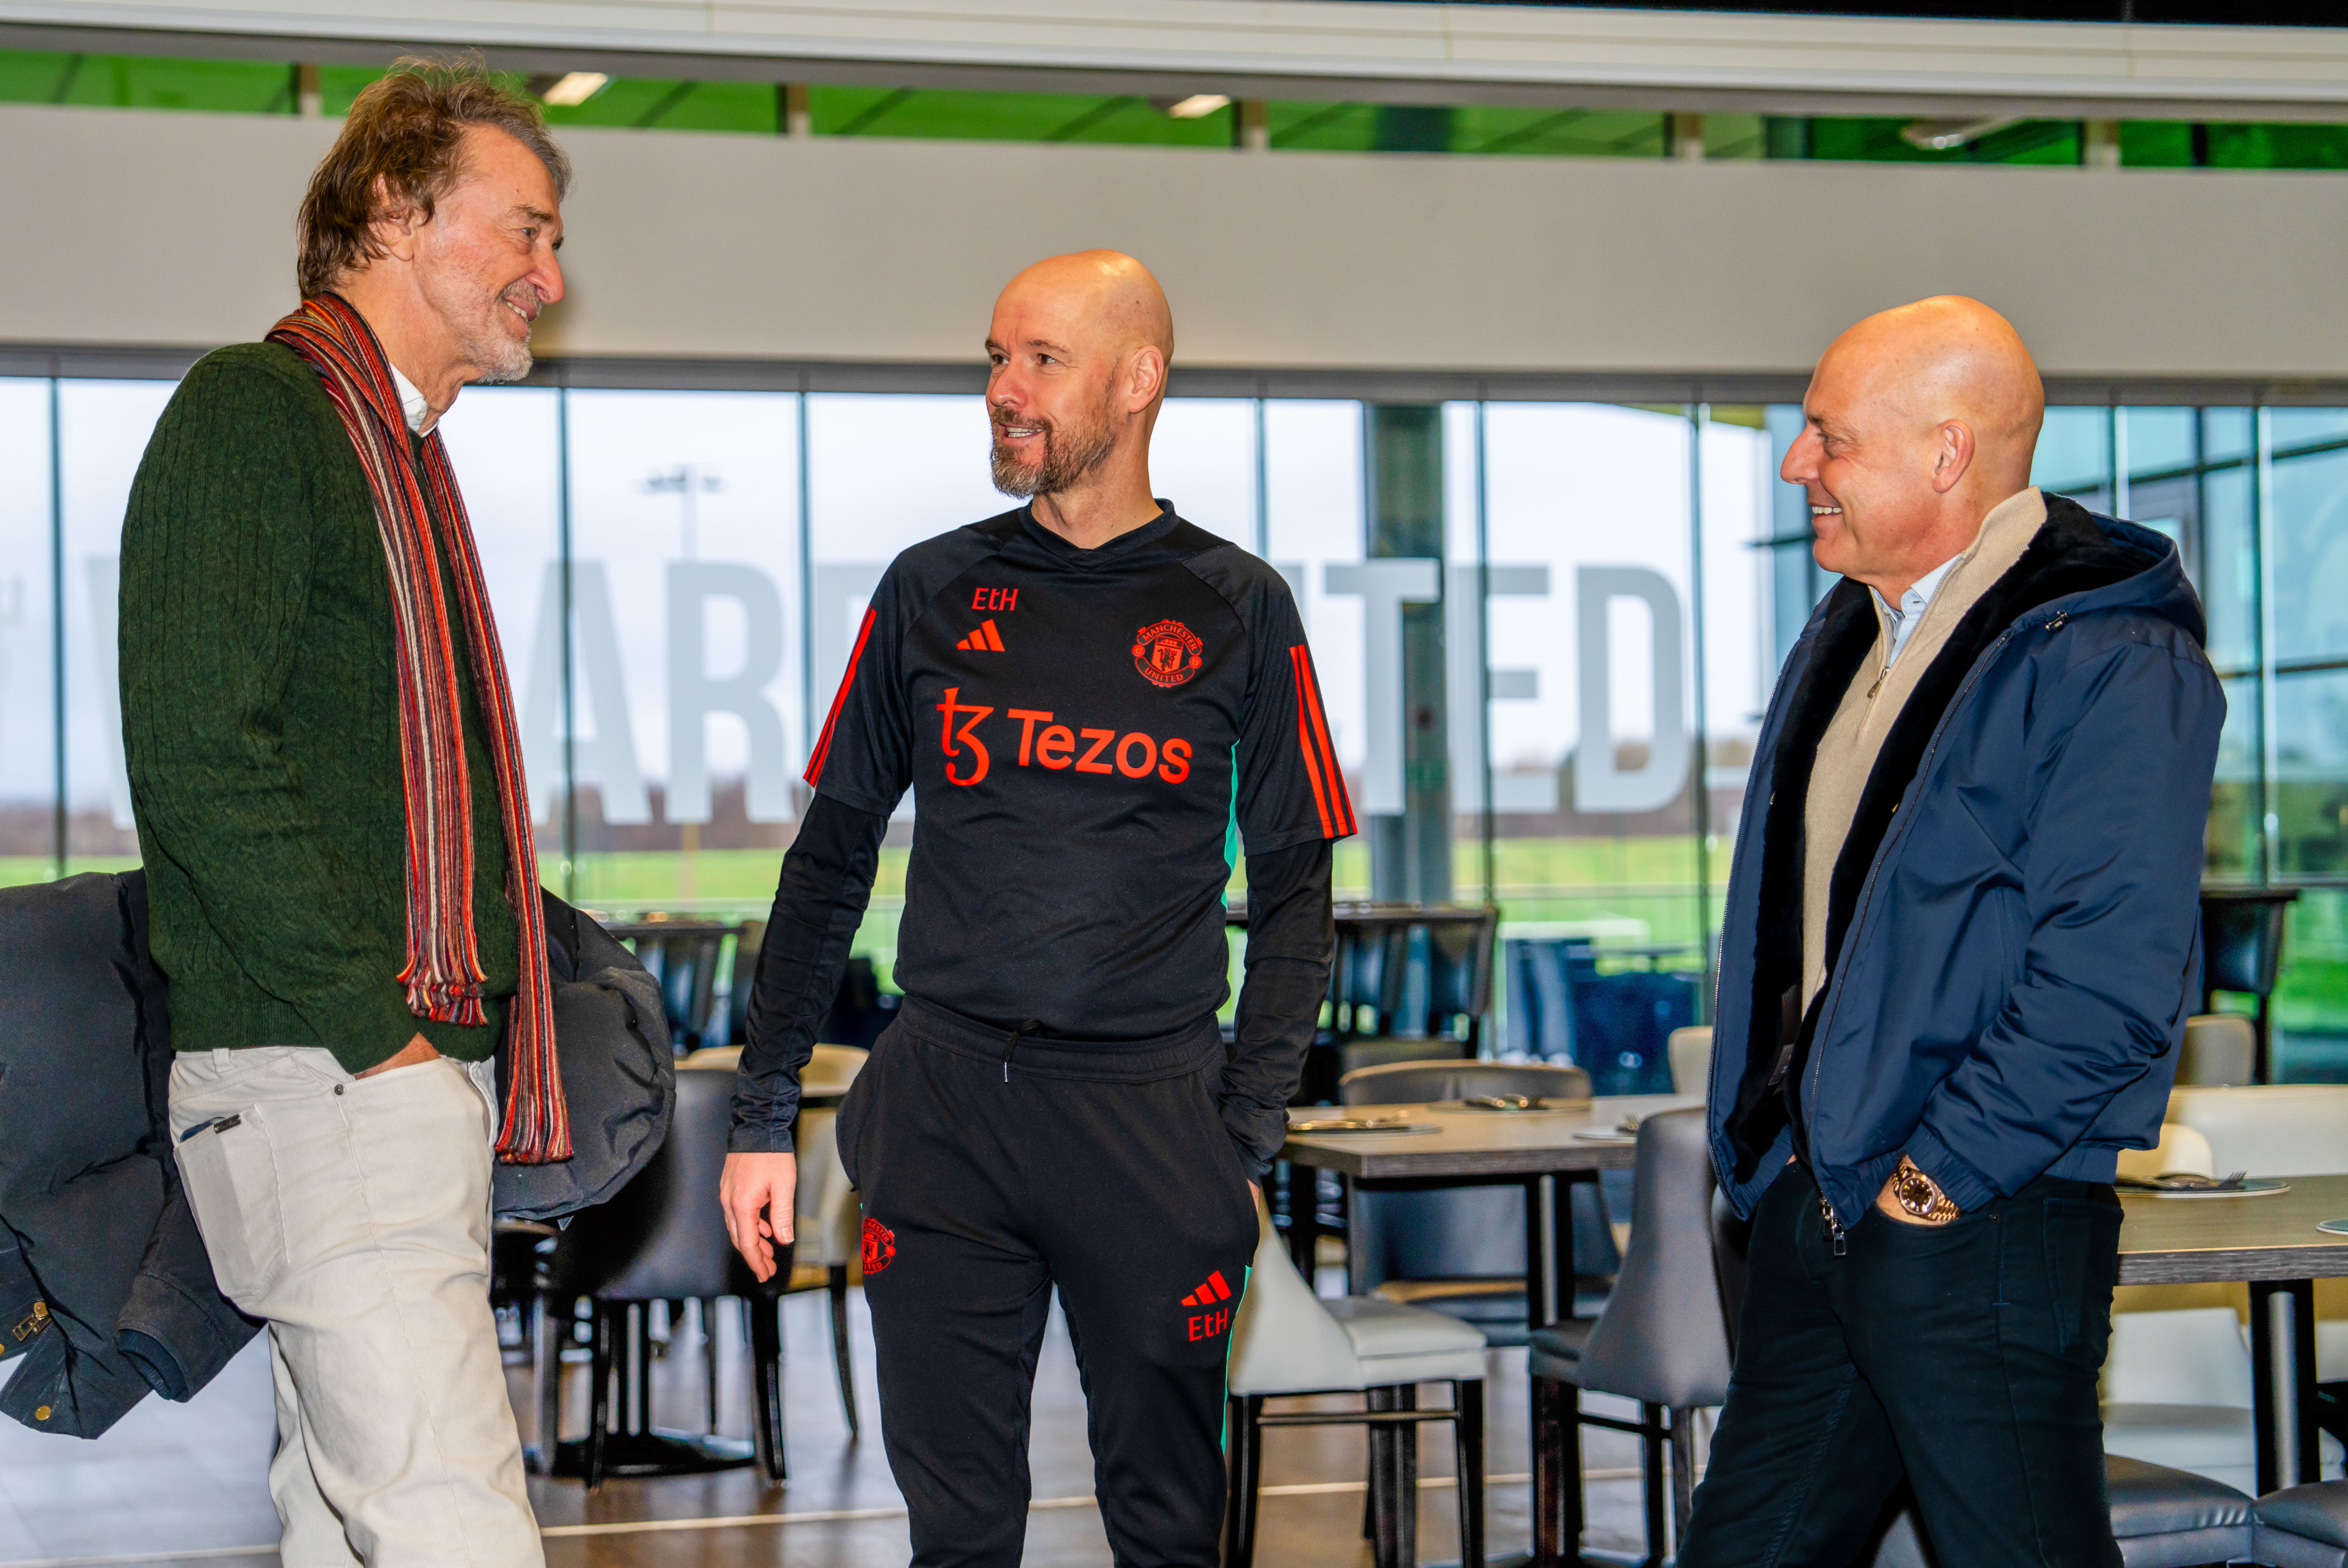 Ratcliffe and Dave Brailsford met manager Ten Hag at Carrington after their investment was complete